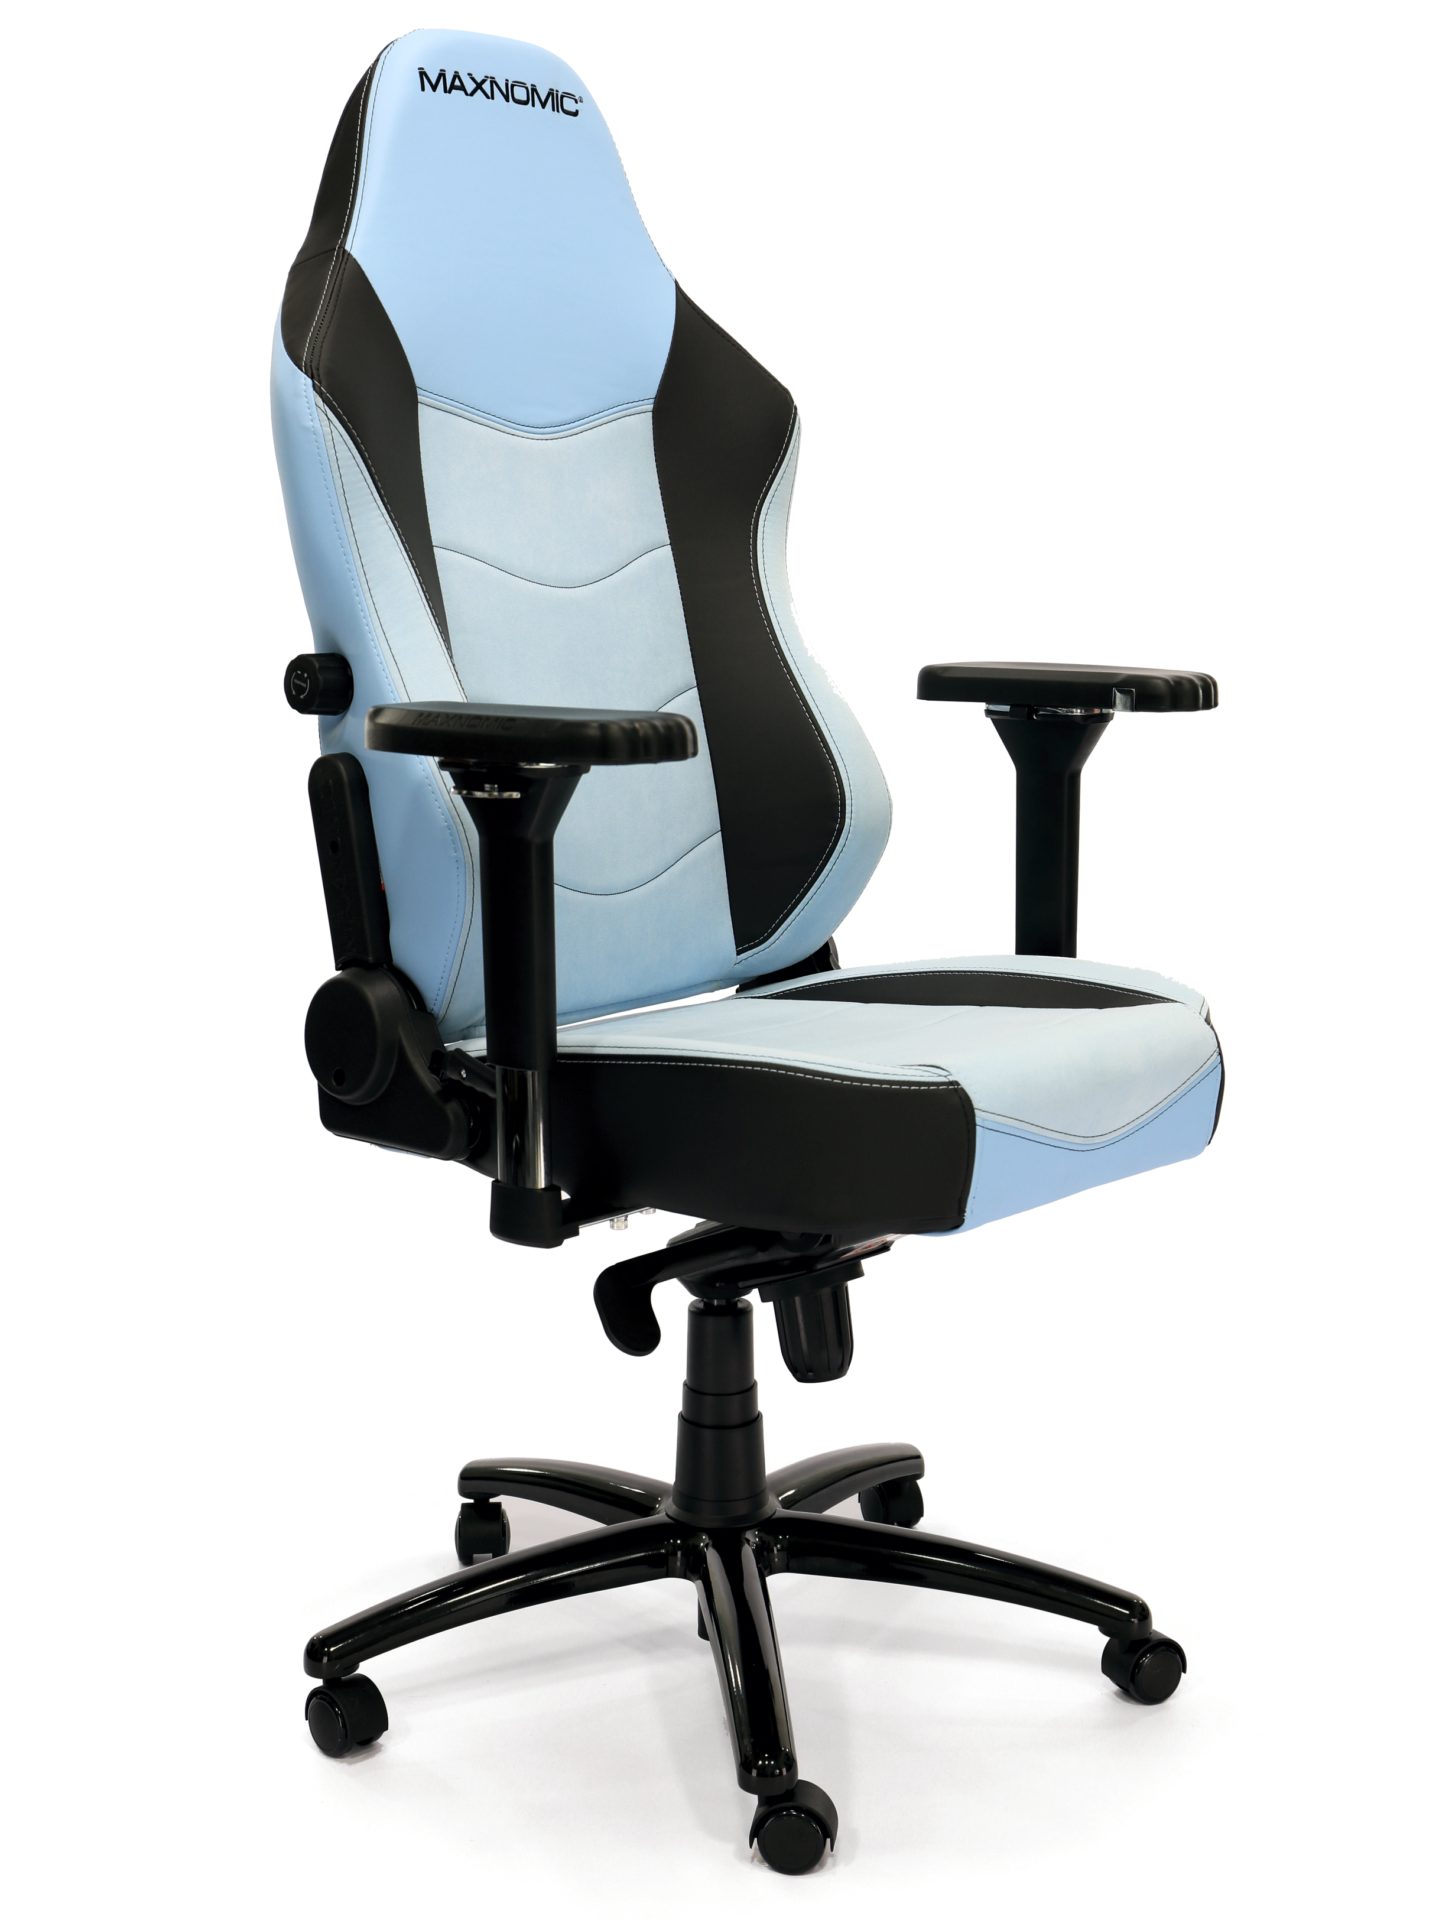 Office chair model Maxnomic® Leader Executive Edition in Light Blue. Pastel blue office chair with microfiber and imitation leather upholstery, black accents and integrated lumbar support.